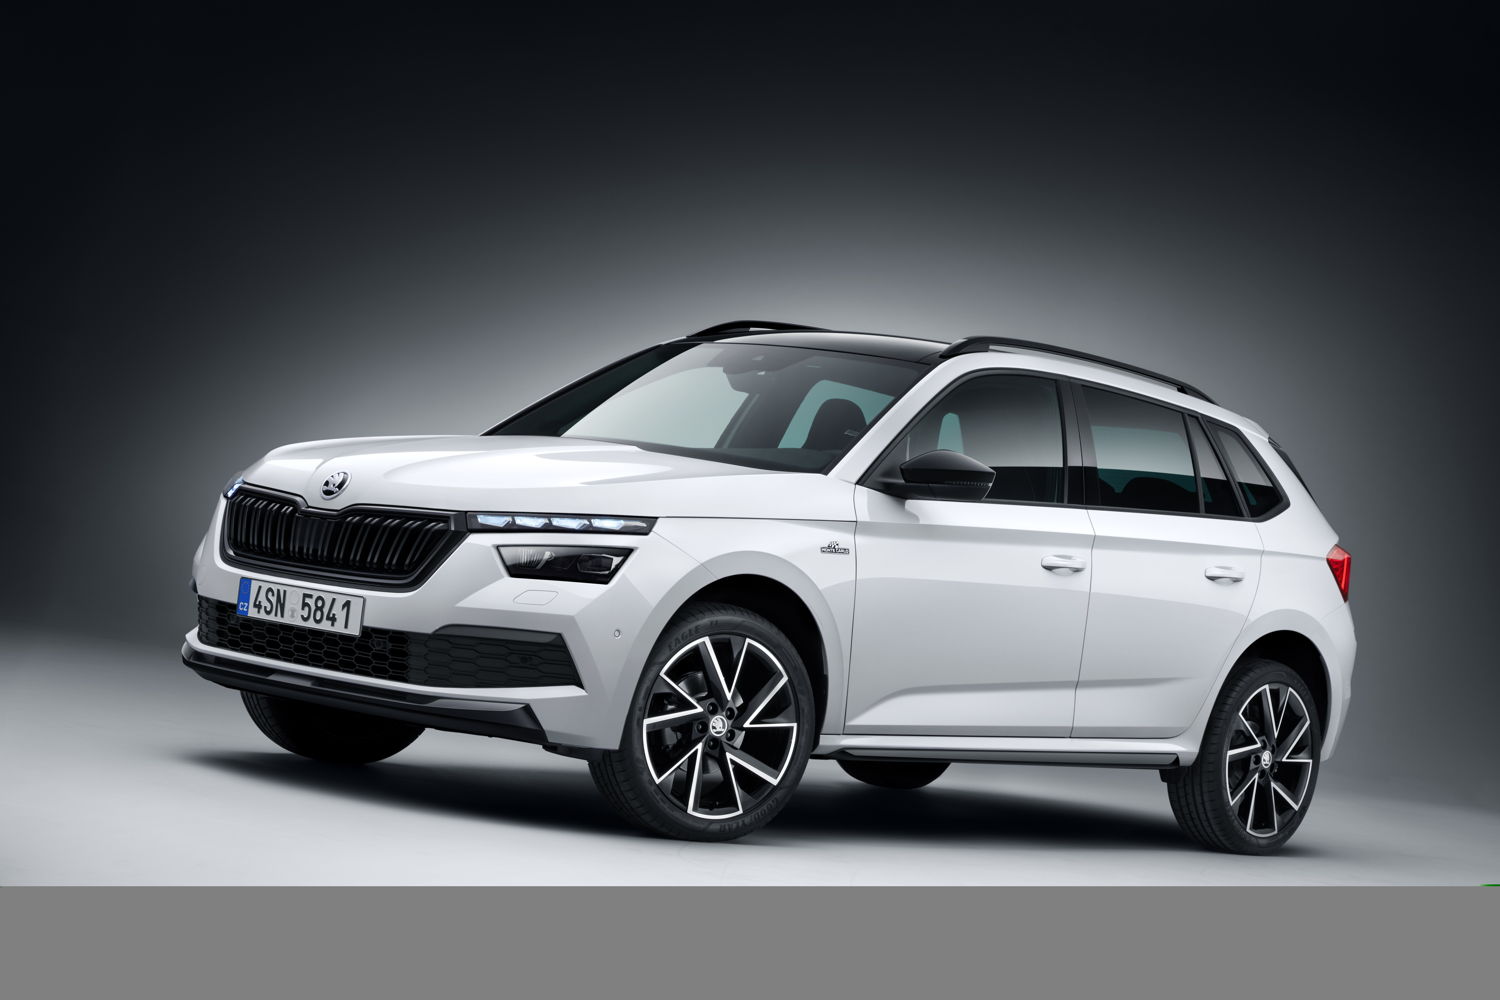 ŠKODA is also continuing the tradition of sporty, lifestyle-oriented MONTE CARLO variants with the new KAMIQ city SUV.